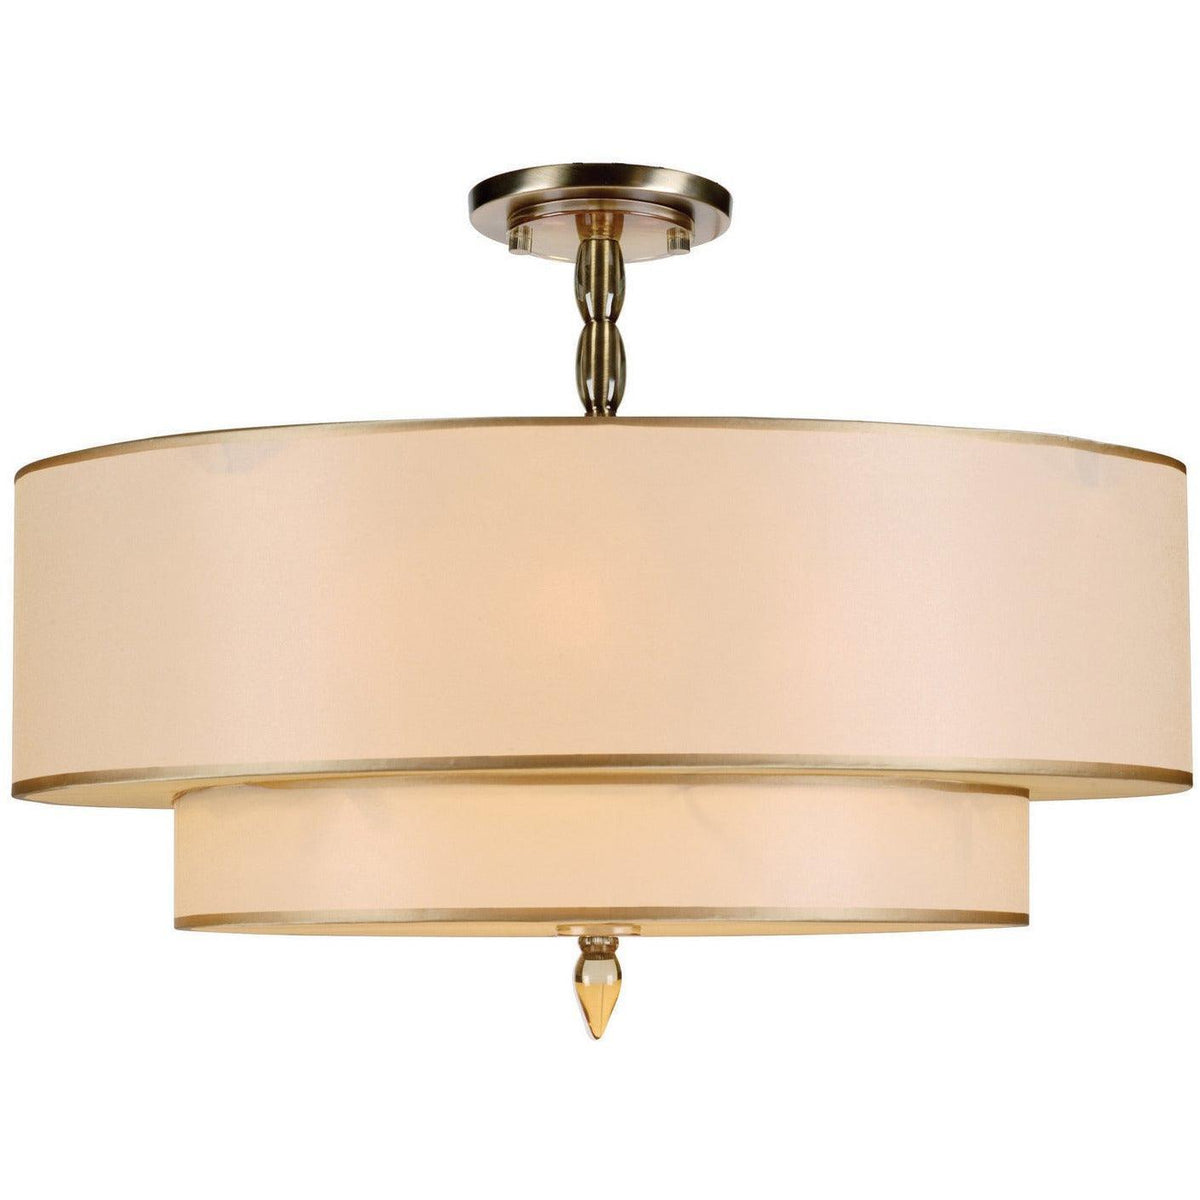 Crystorama - Luxo Five Light Ceiling Mount - 9507-AB_CEILING | Montreal Lighting & Hardware